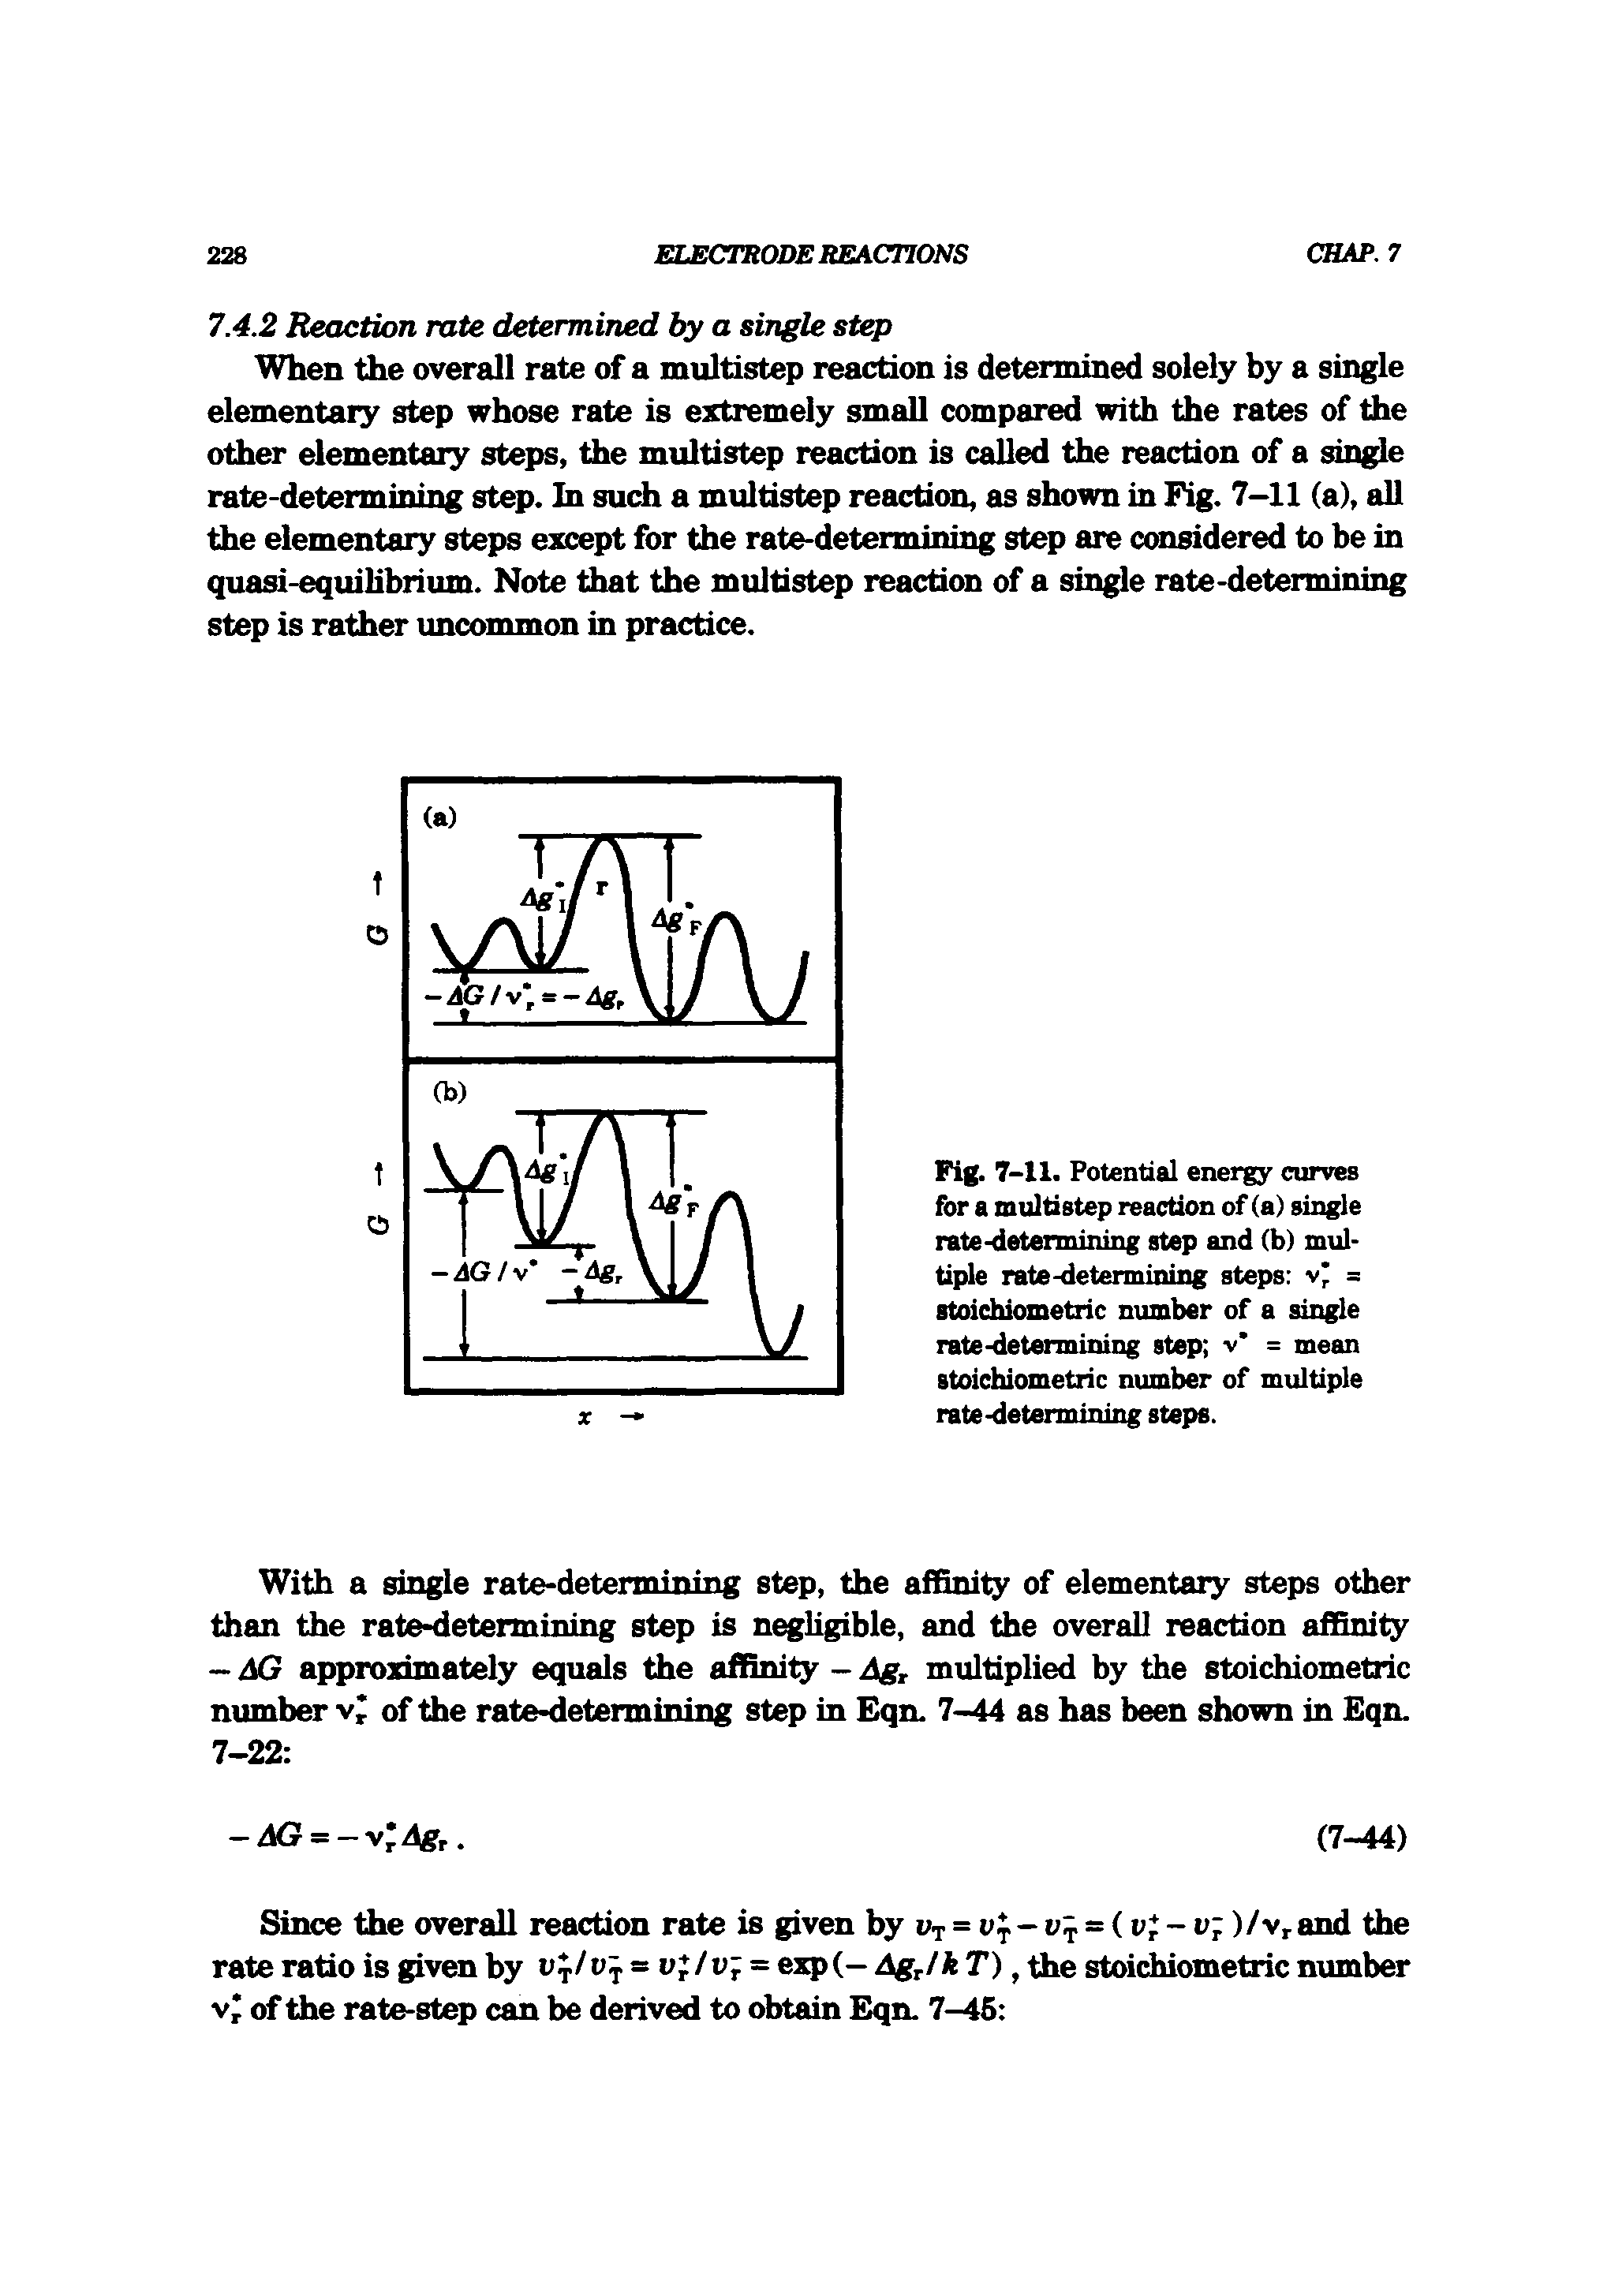 Fig. 7-11. Potential energy curves for a mialtistep reaction of (a) single rate-determining step and (b) multiple rate-determining steps v = stoichiometric number of a single rate-determining step v = mean stoichiometric number of multiple rate-determining steps.